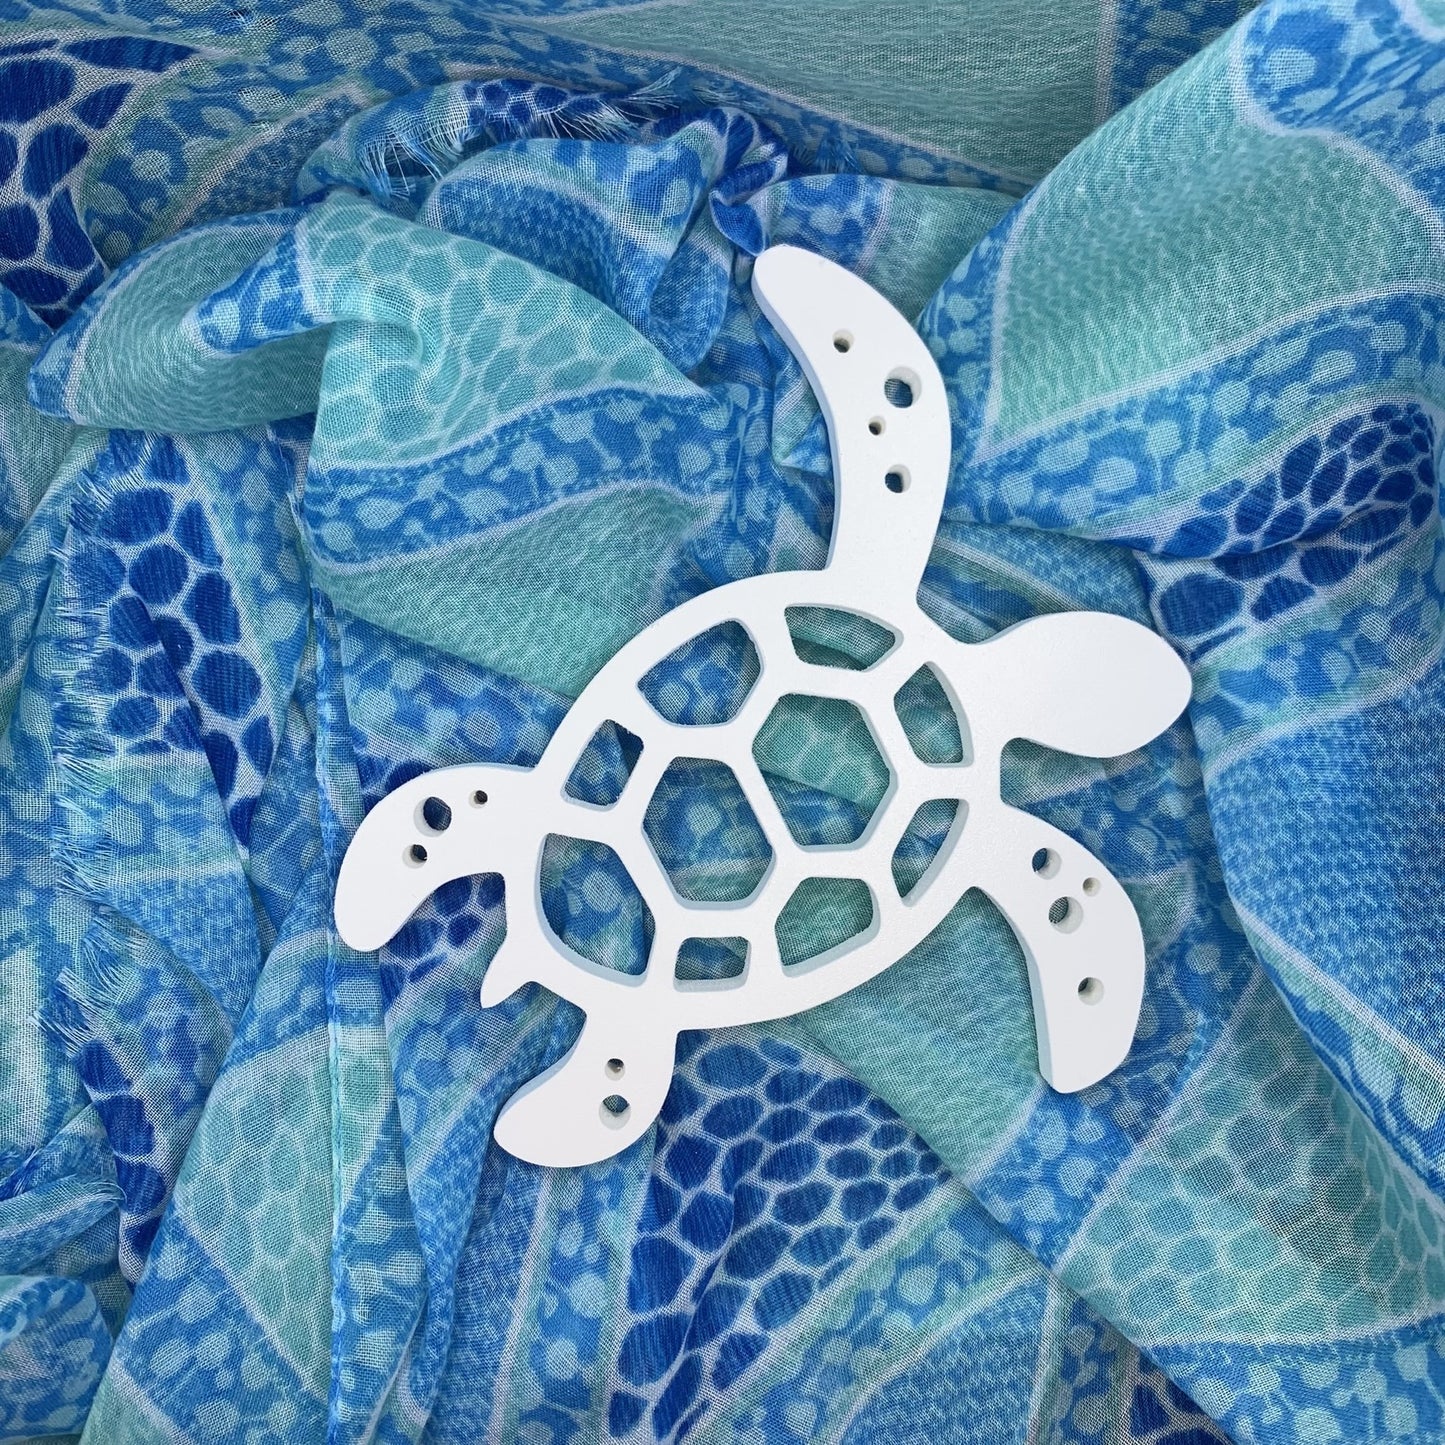 Shutter Embellishments - Turtle 2021 Wall Art Small approx 8" x 7", Custom, Outdoor Decor, Tropical, Ships Free to Mainland USA